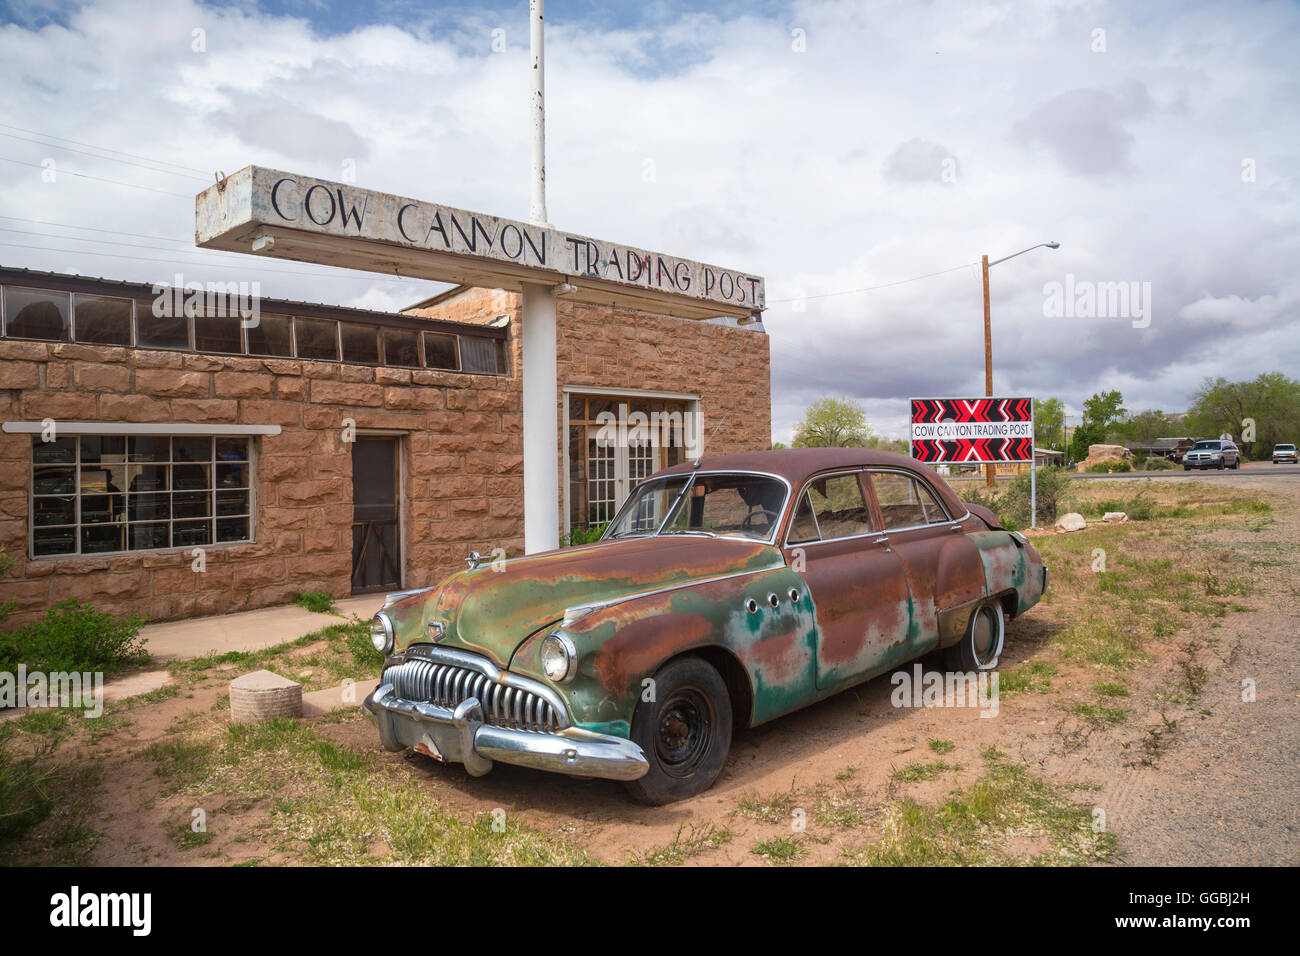 Abandoned classic car outside empty building in Bluff Utah USA Stock Photo